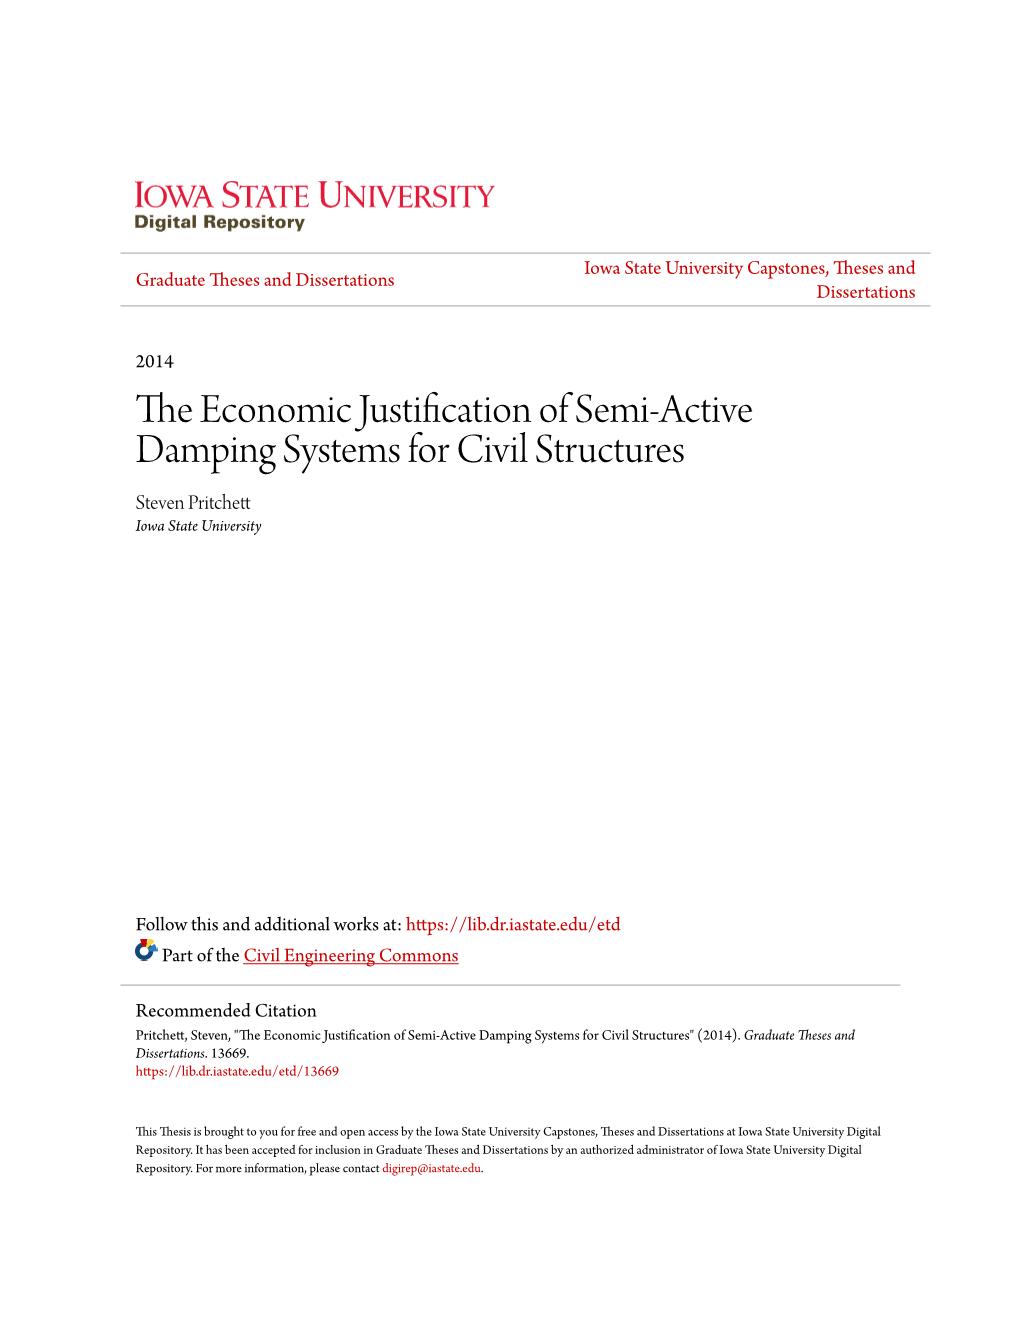 The Economic Justification of Semi-Active Damping Systems for Civil Structures